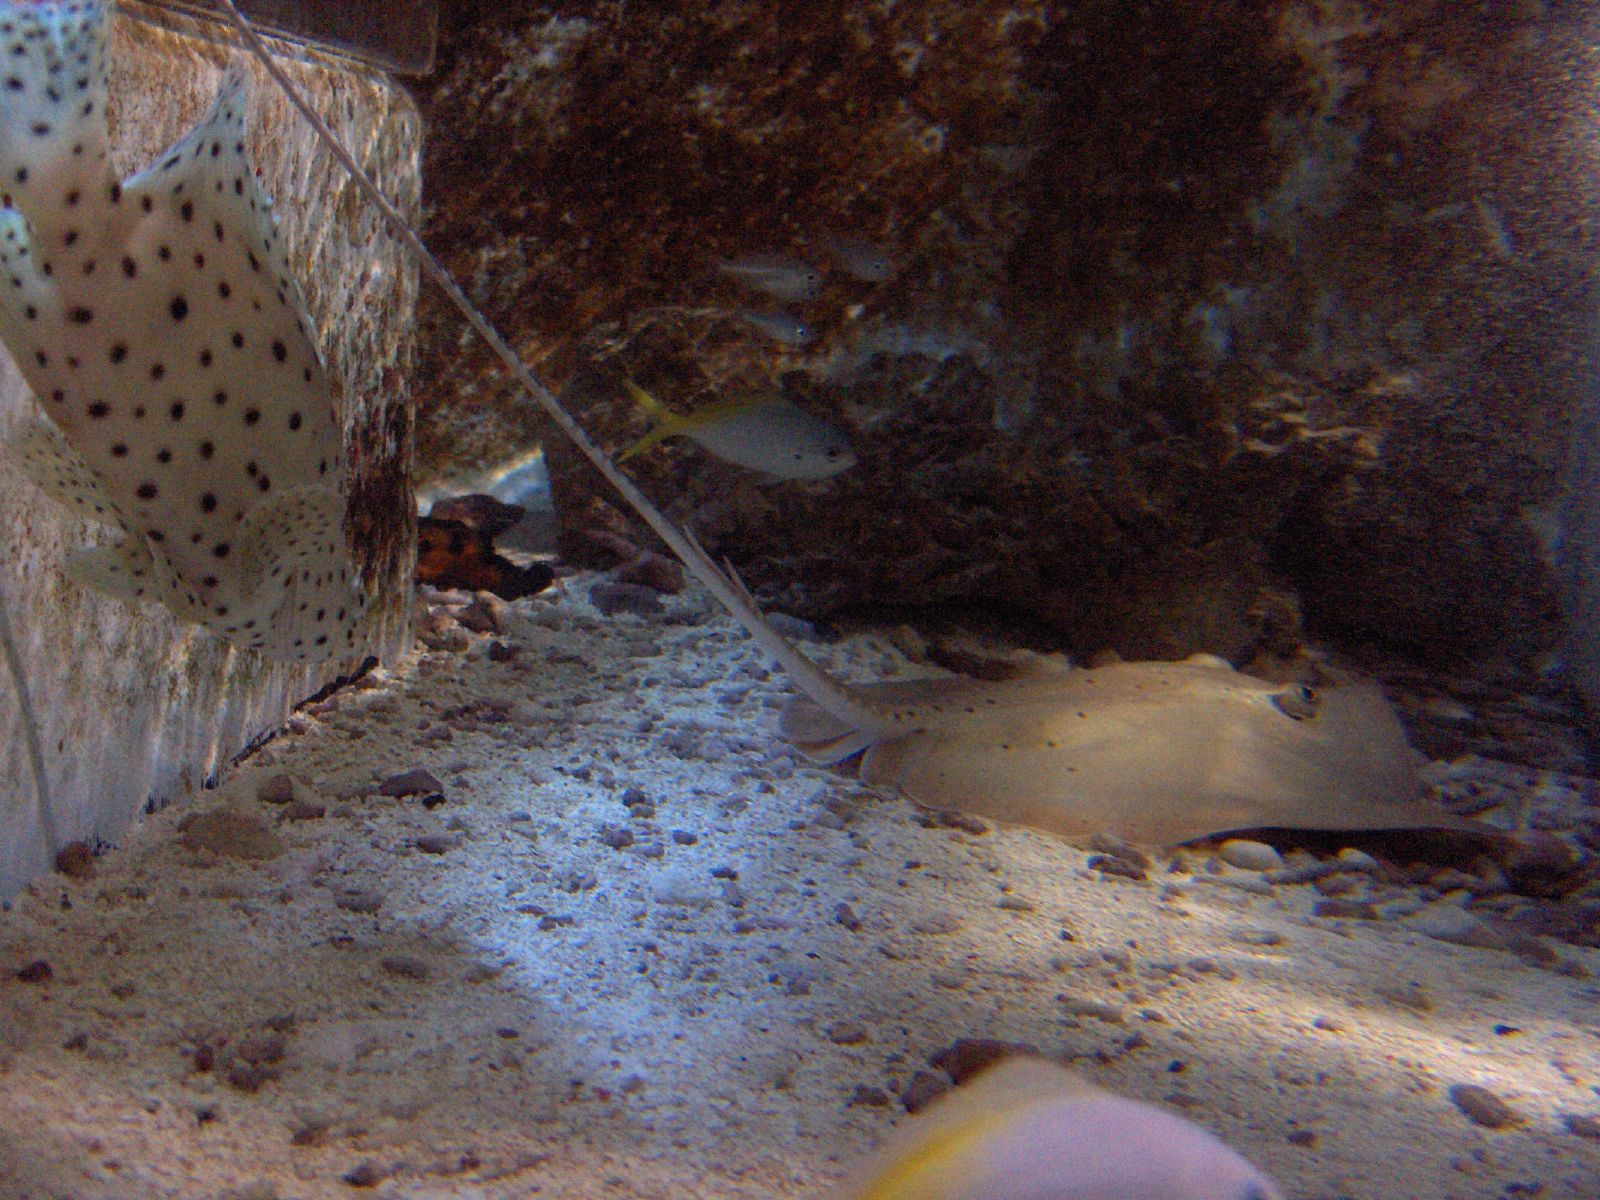 an underwater view of a very pretty spotted object